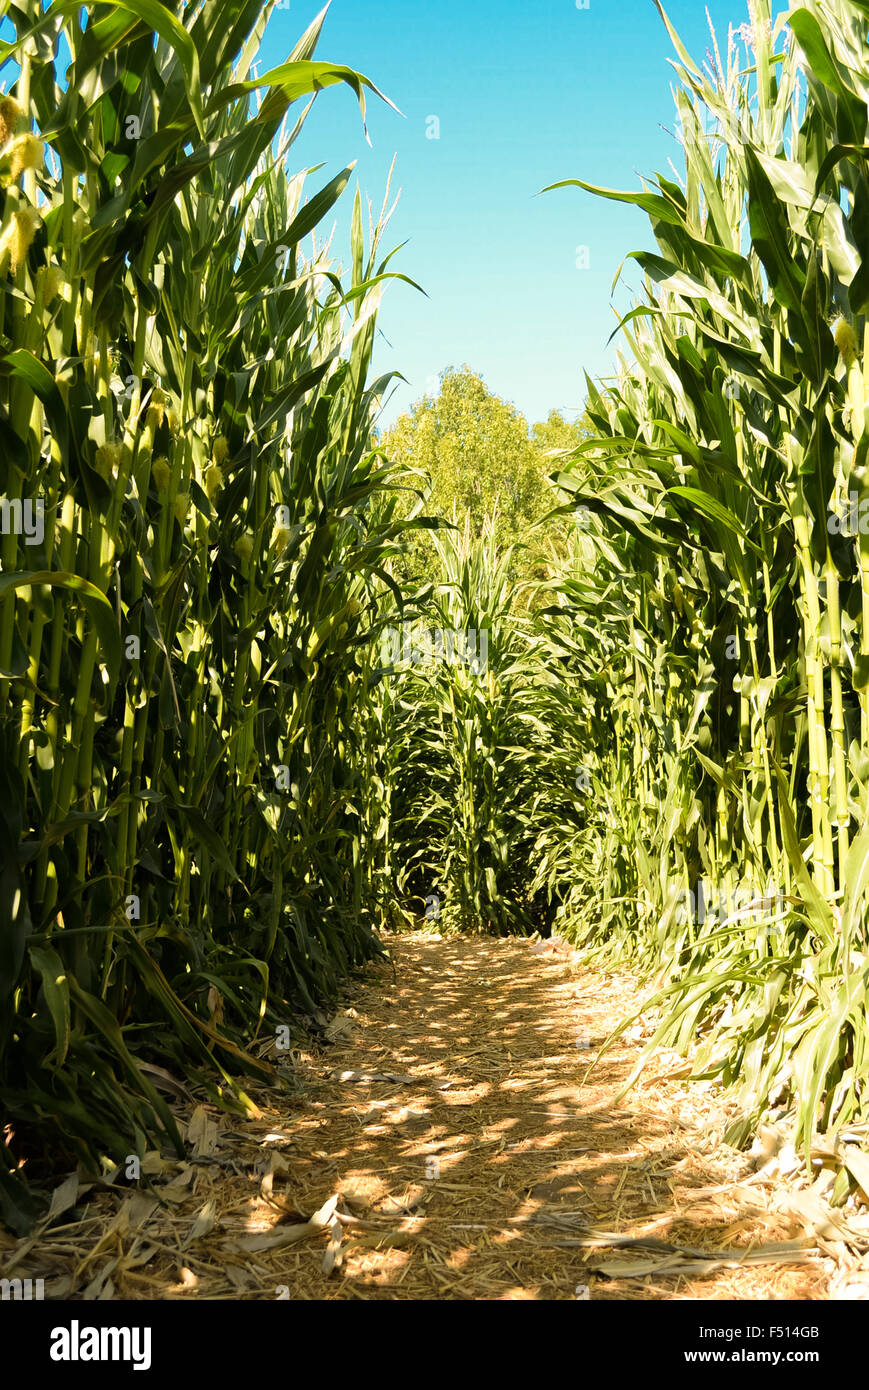 Hay covered on ground under row of tall green corn stalks Stock Photo